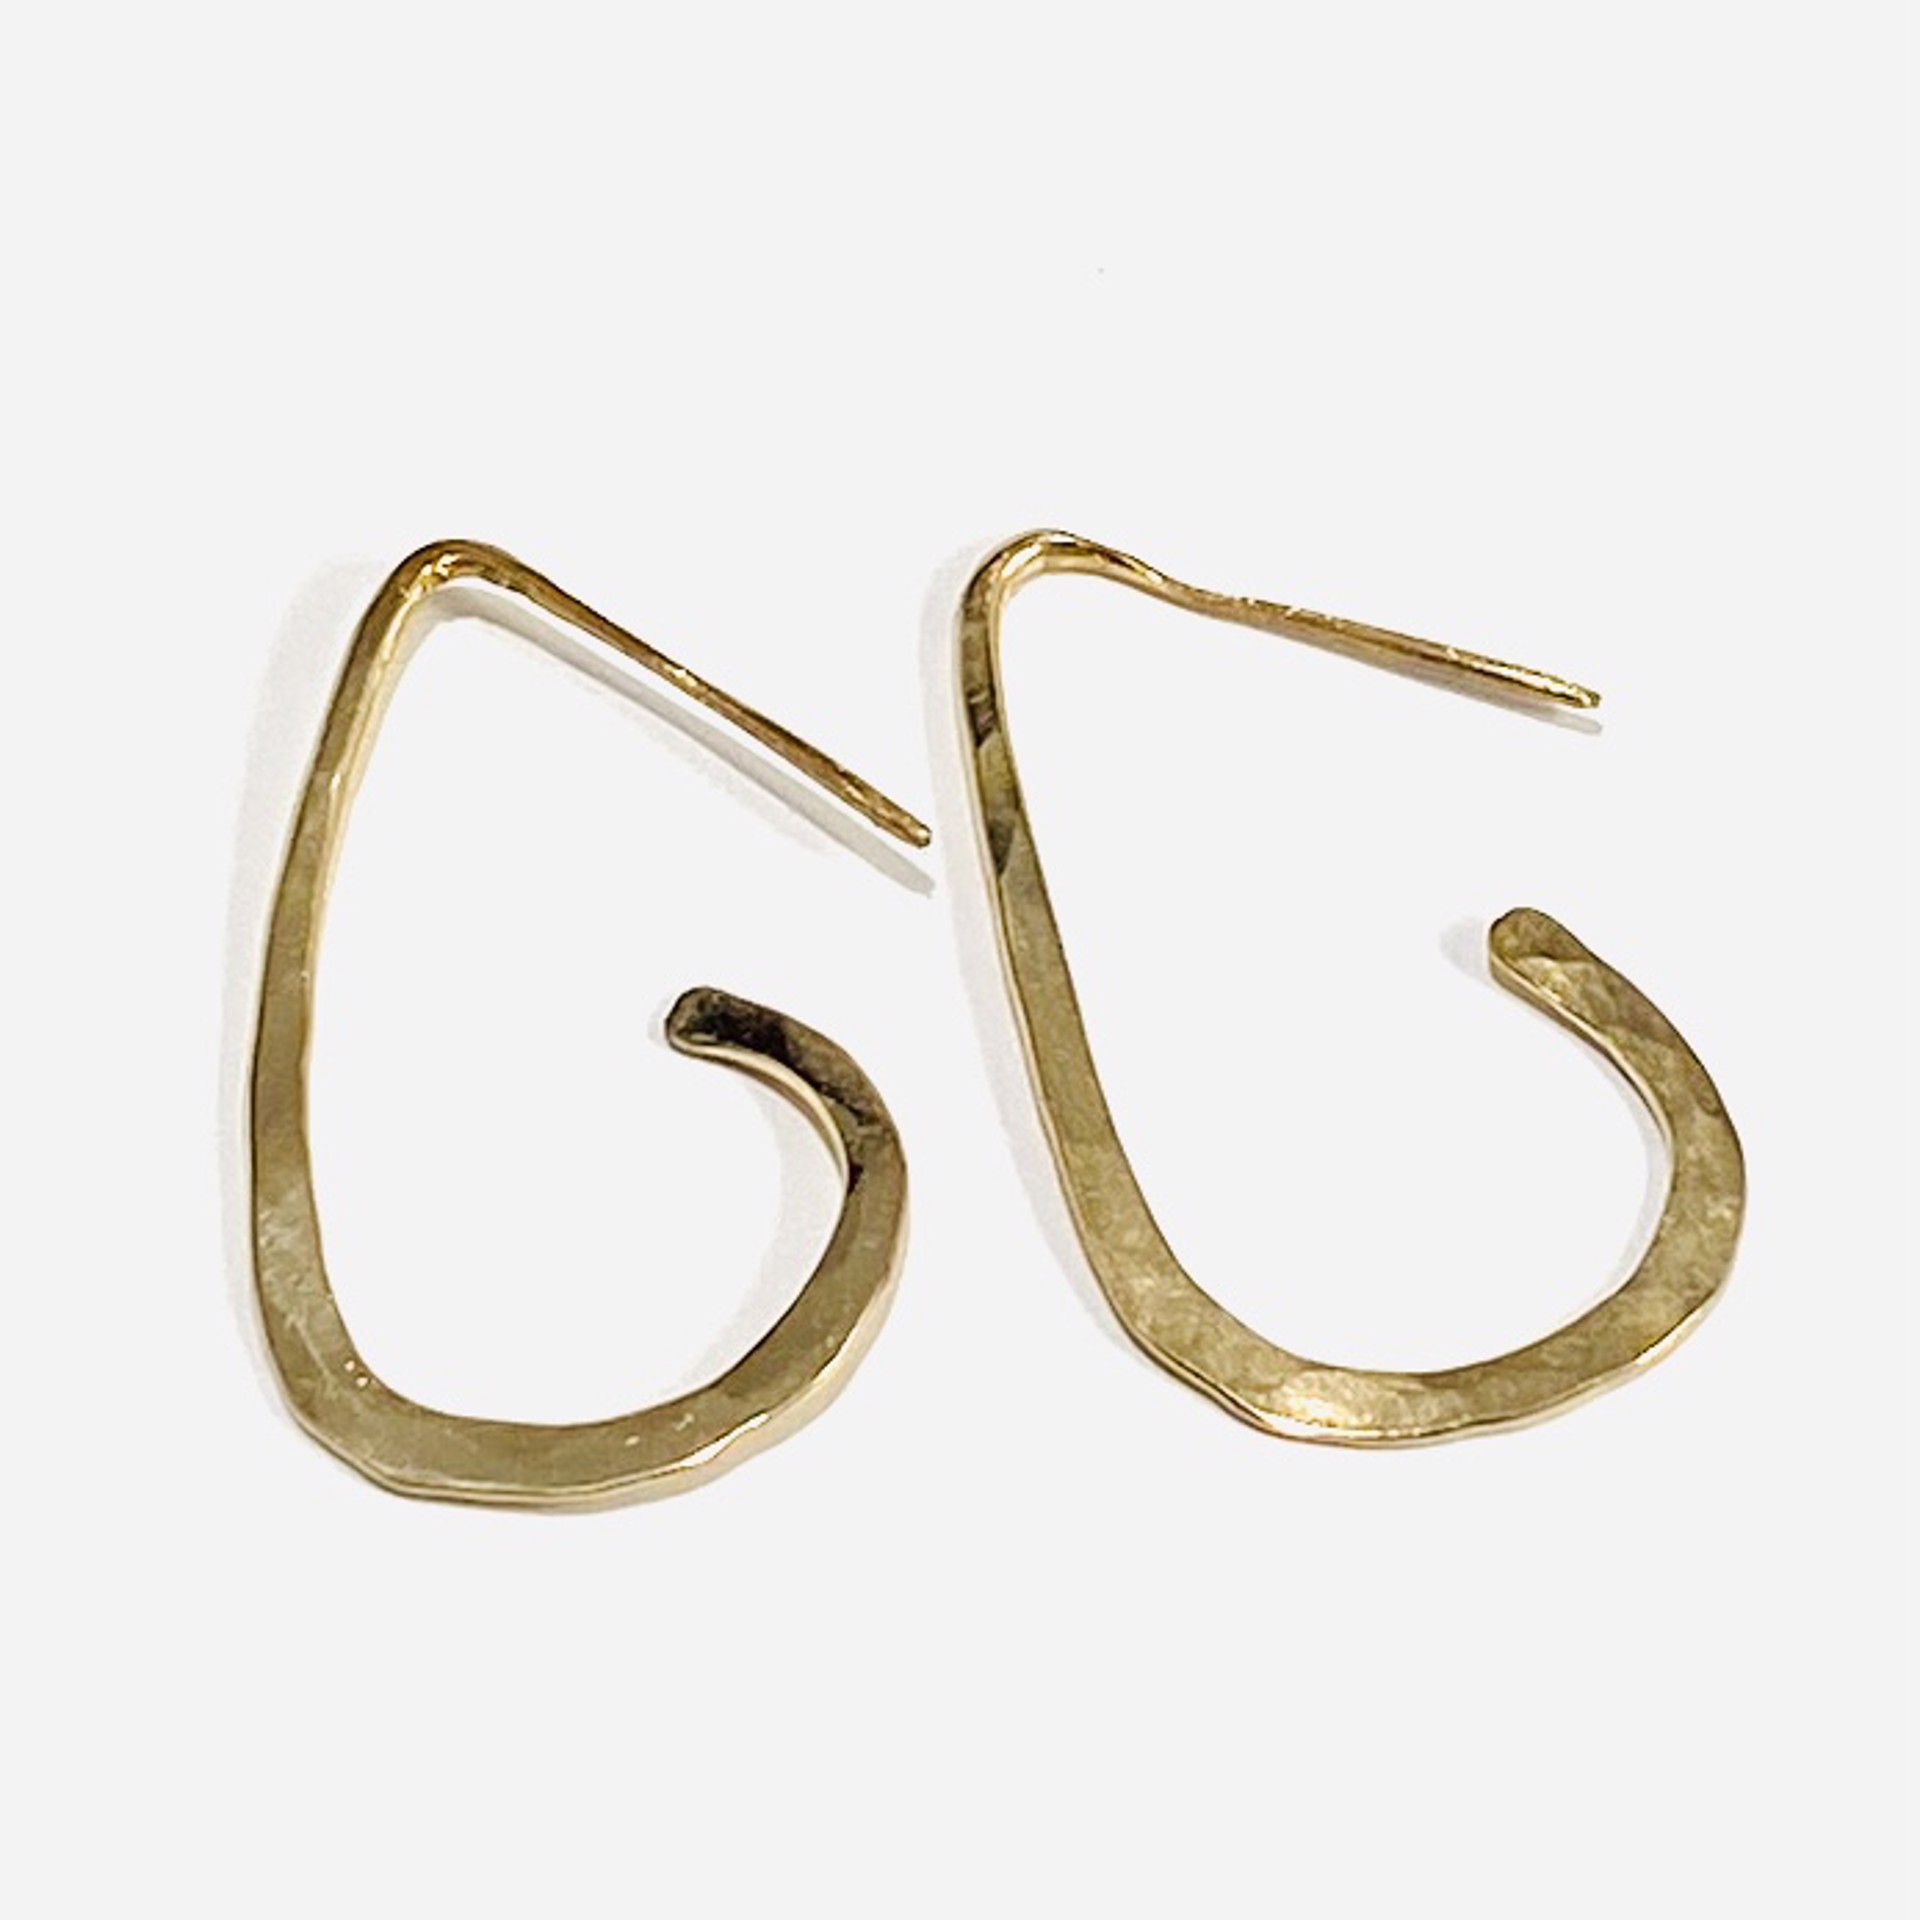 AB23-23 Hand Forged 14k GF Open Hoop Earrings by Anne Bivens